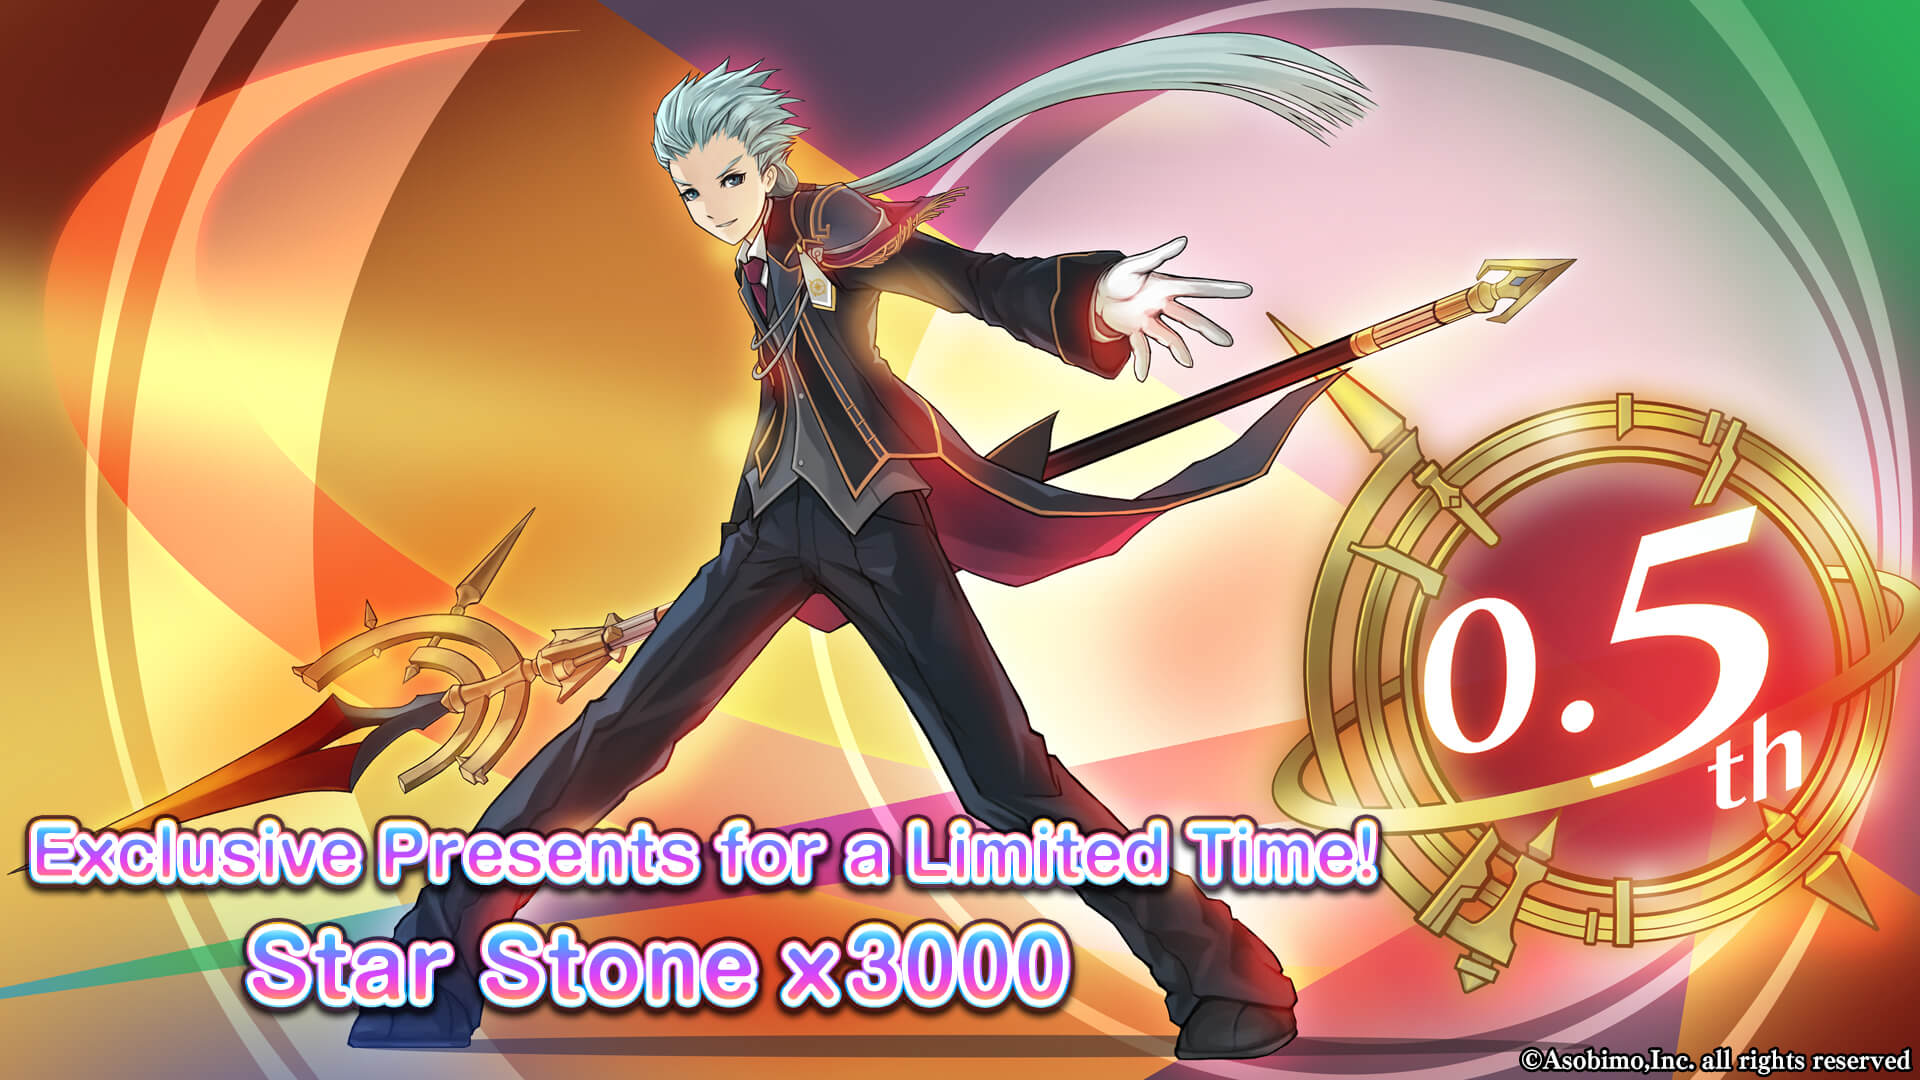 Half Anniversary! Exclusive Presents"Star Stone x3000" for a Limited Time!